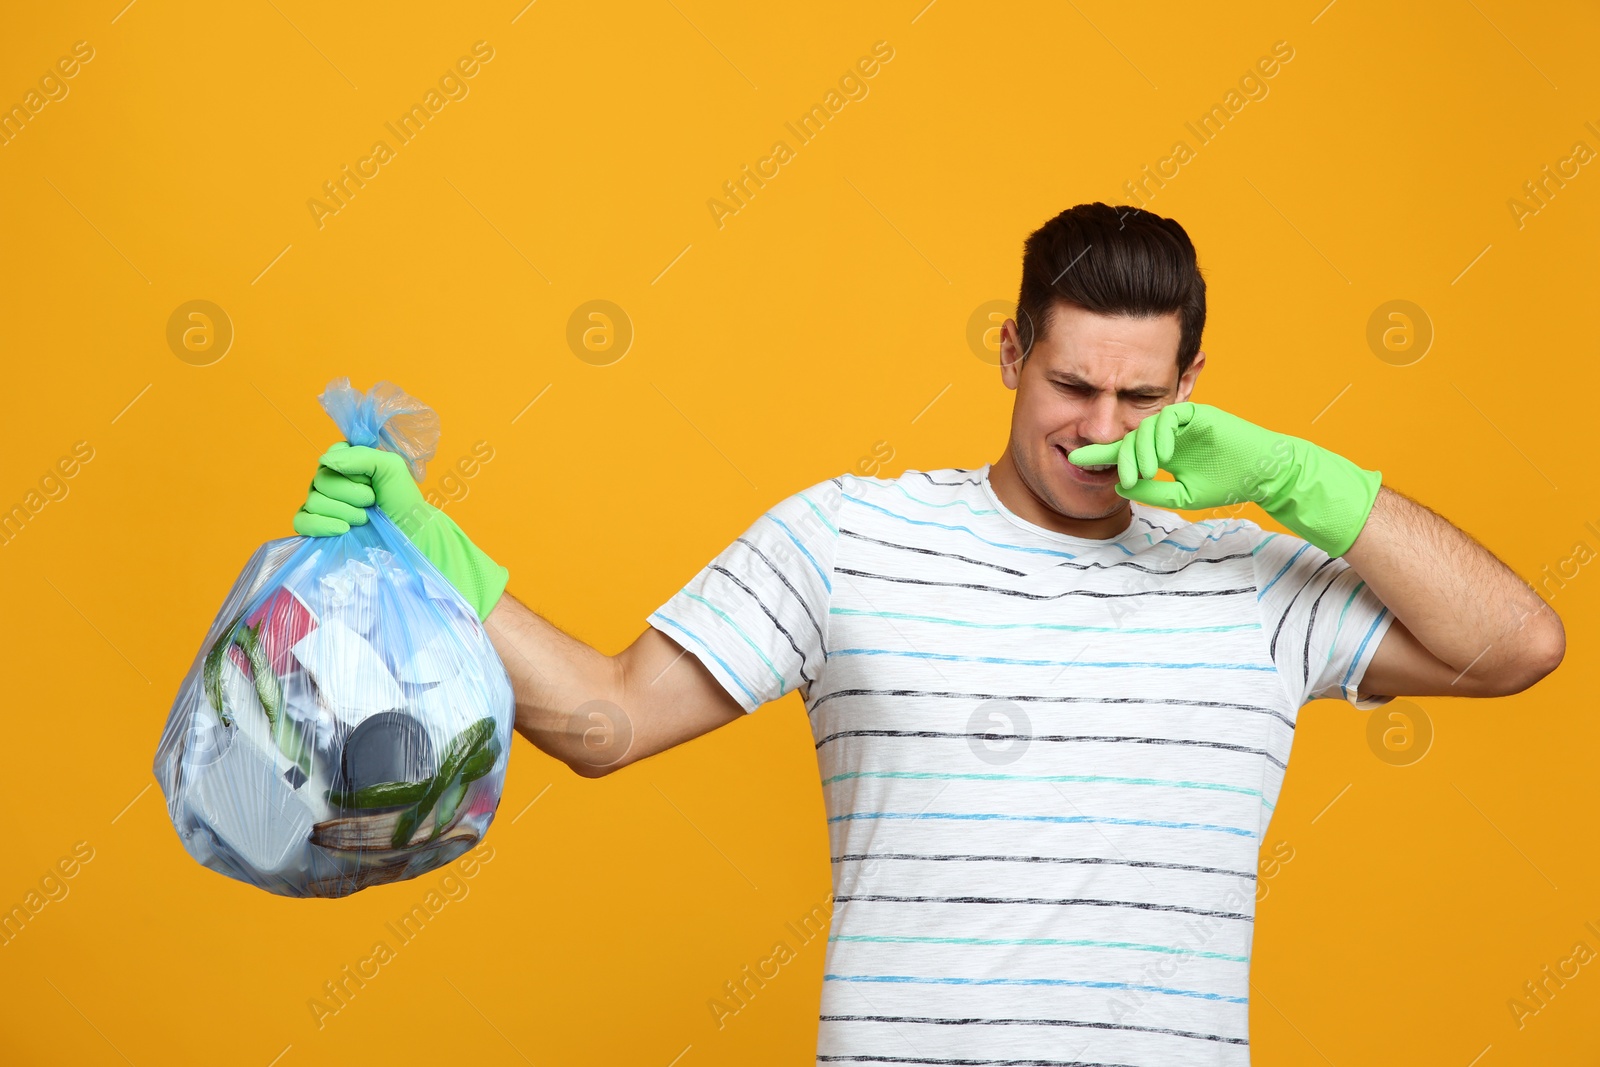 Photo of Man holding full garbage bag on yellow background